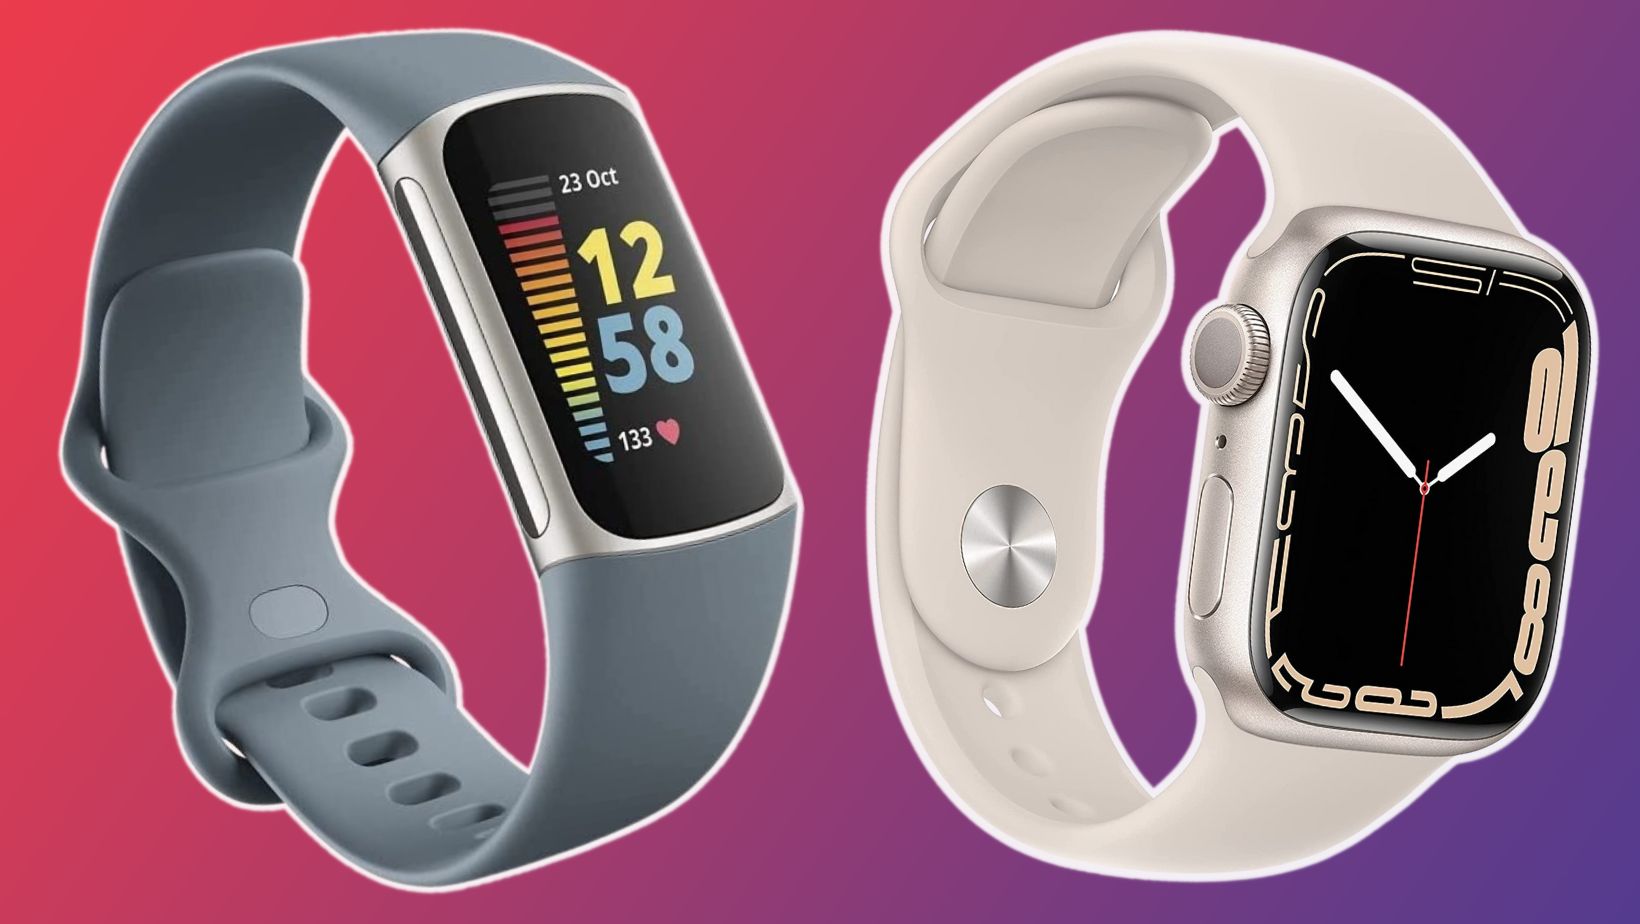 Check heart health with Apple Watch in 7 ways - 9to5Mac